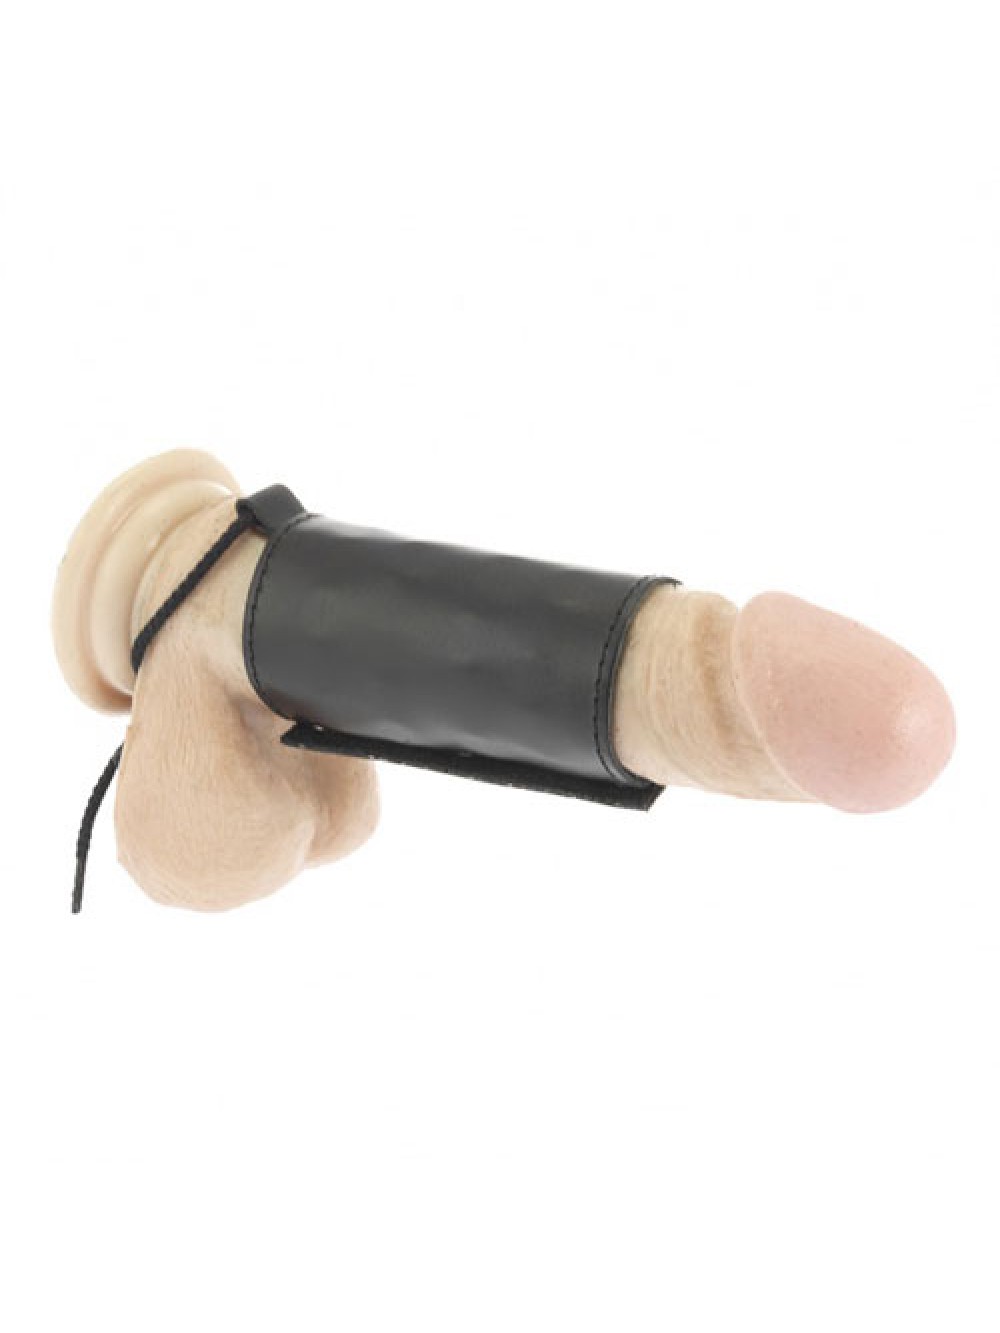 Leather Cock Ring With Nails Inside 8718924227886